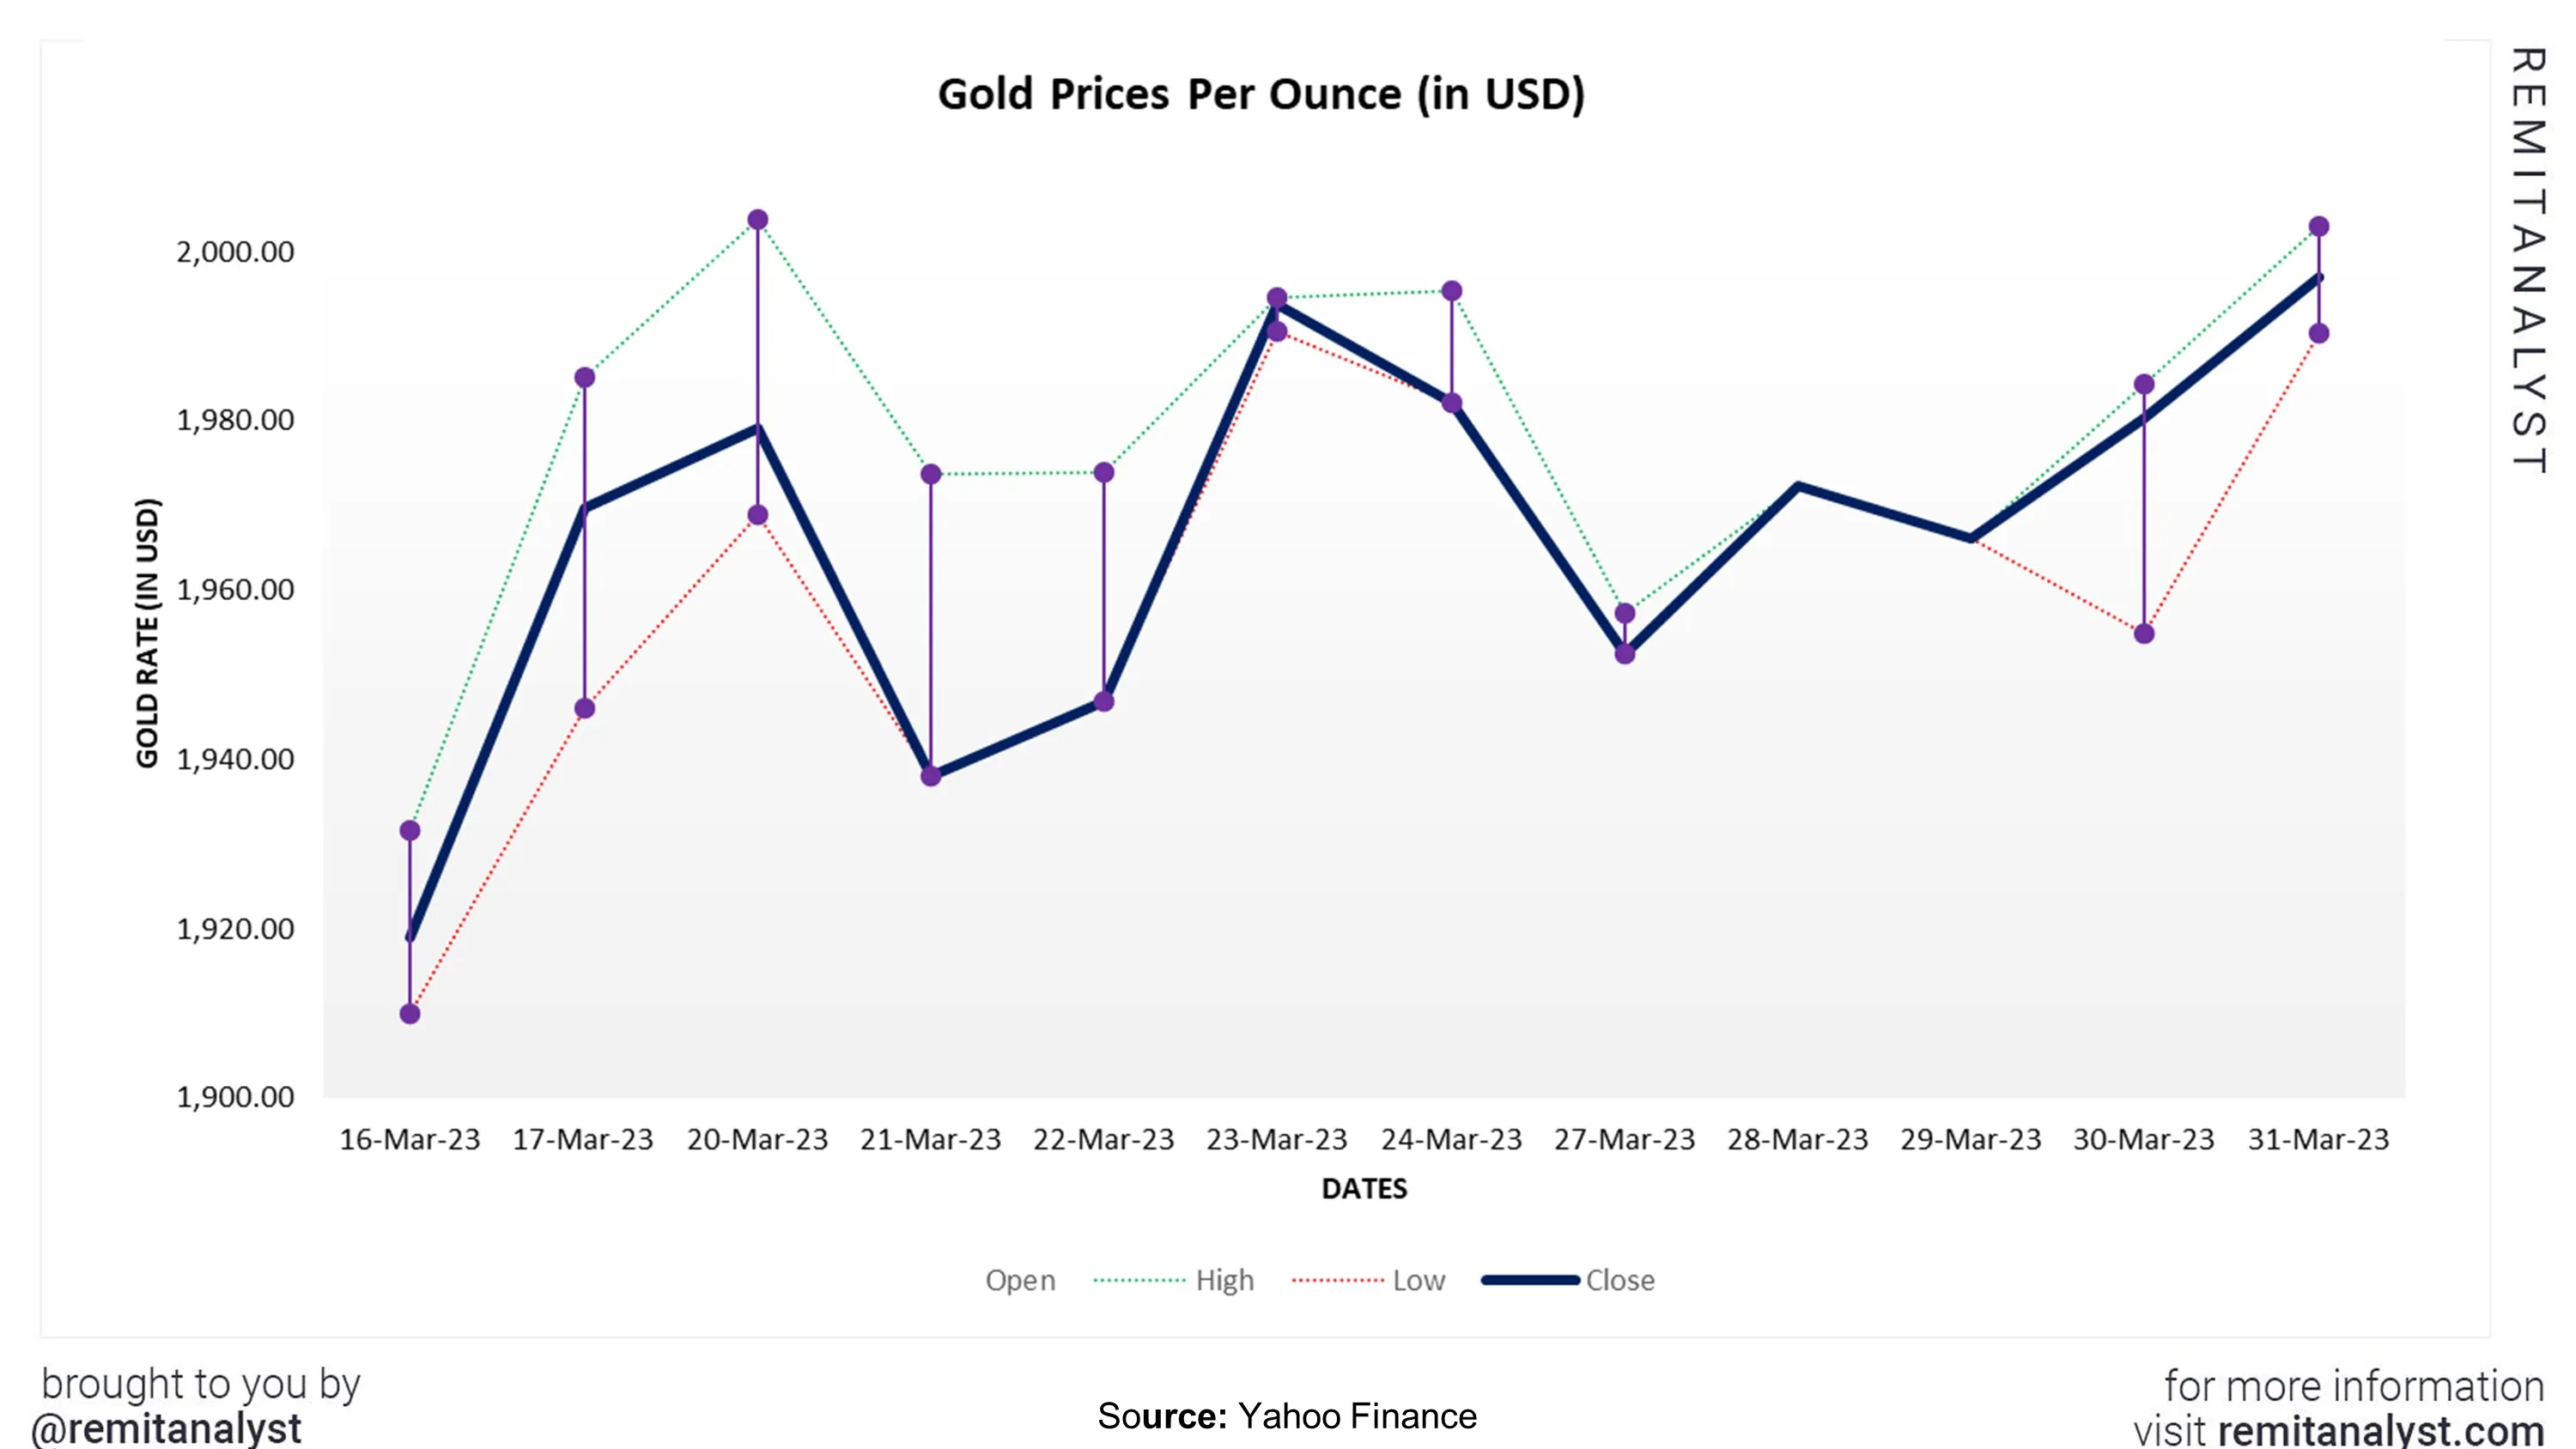 gold-prices-from-16-mar-2023-to-31-mar-2023